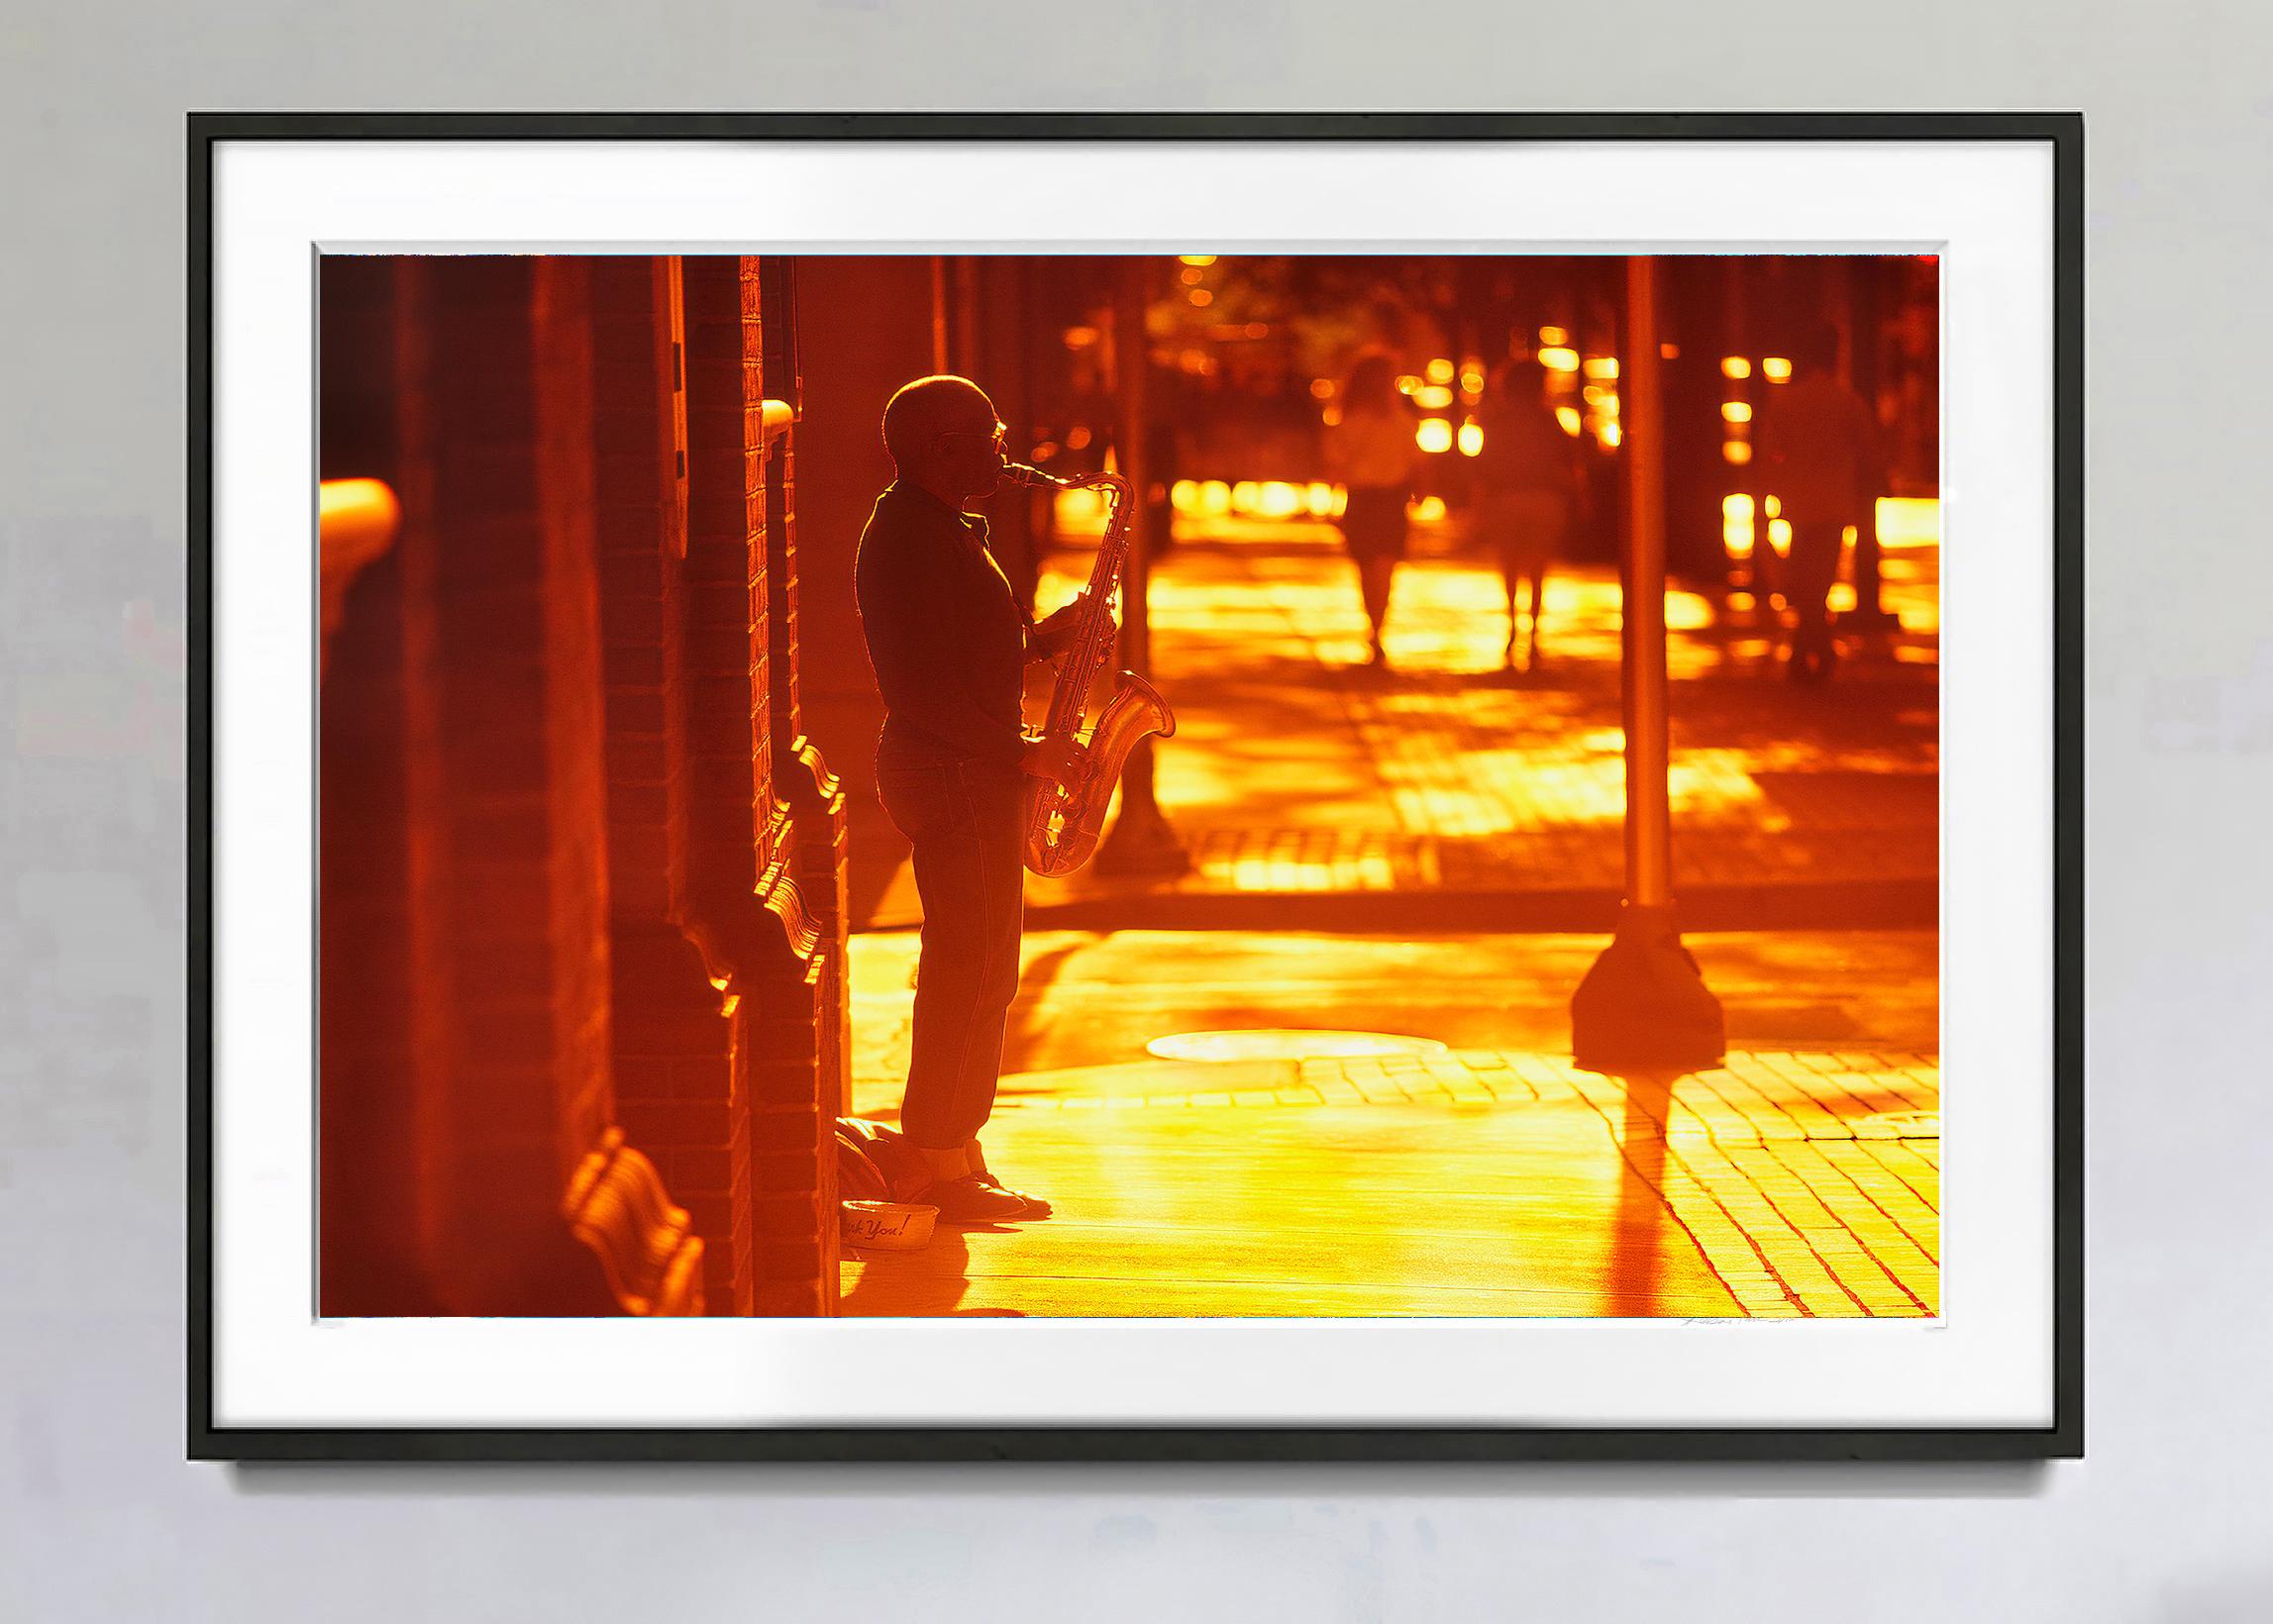 Romantic Street Musician Playing the Saxophone in Golden Light and Orange - Photograph by Mitchell Funk